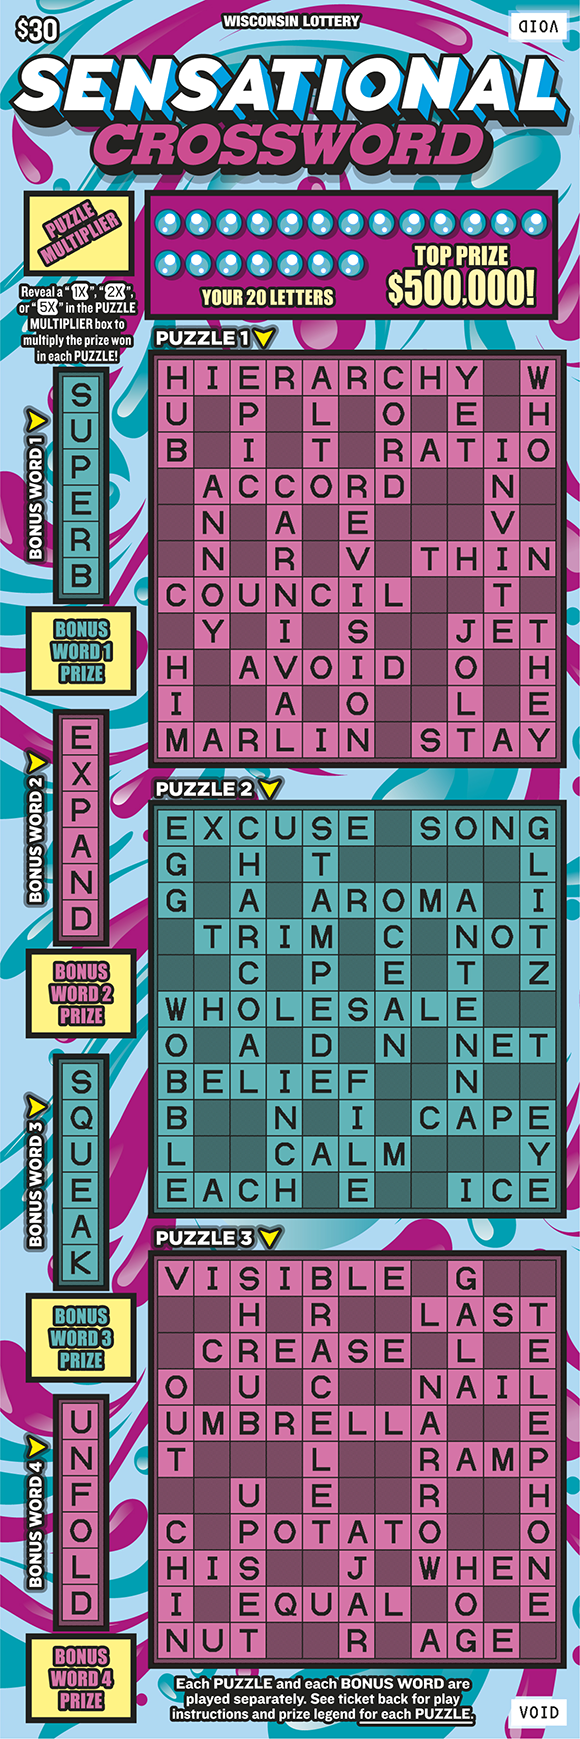 Wisconsin Scratch Game, Sensational Crossword blue and pink background with white and pink text.